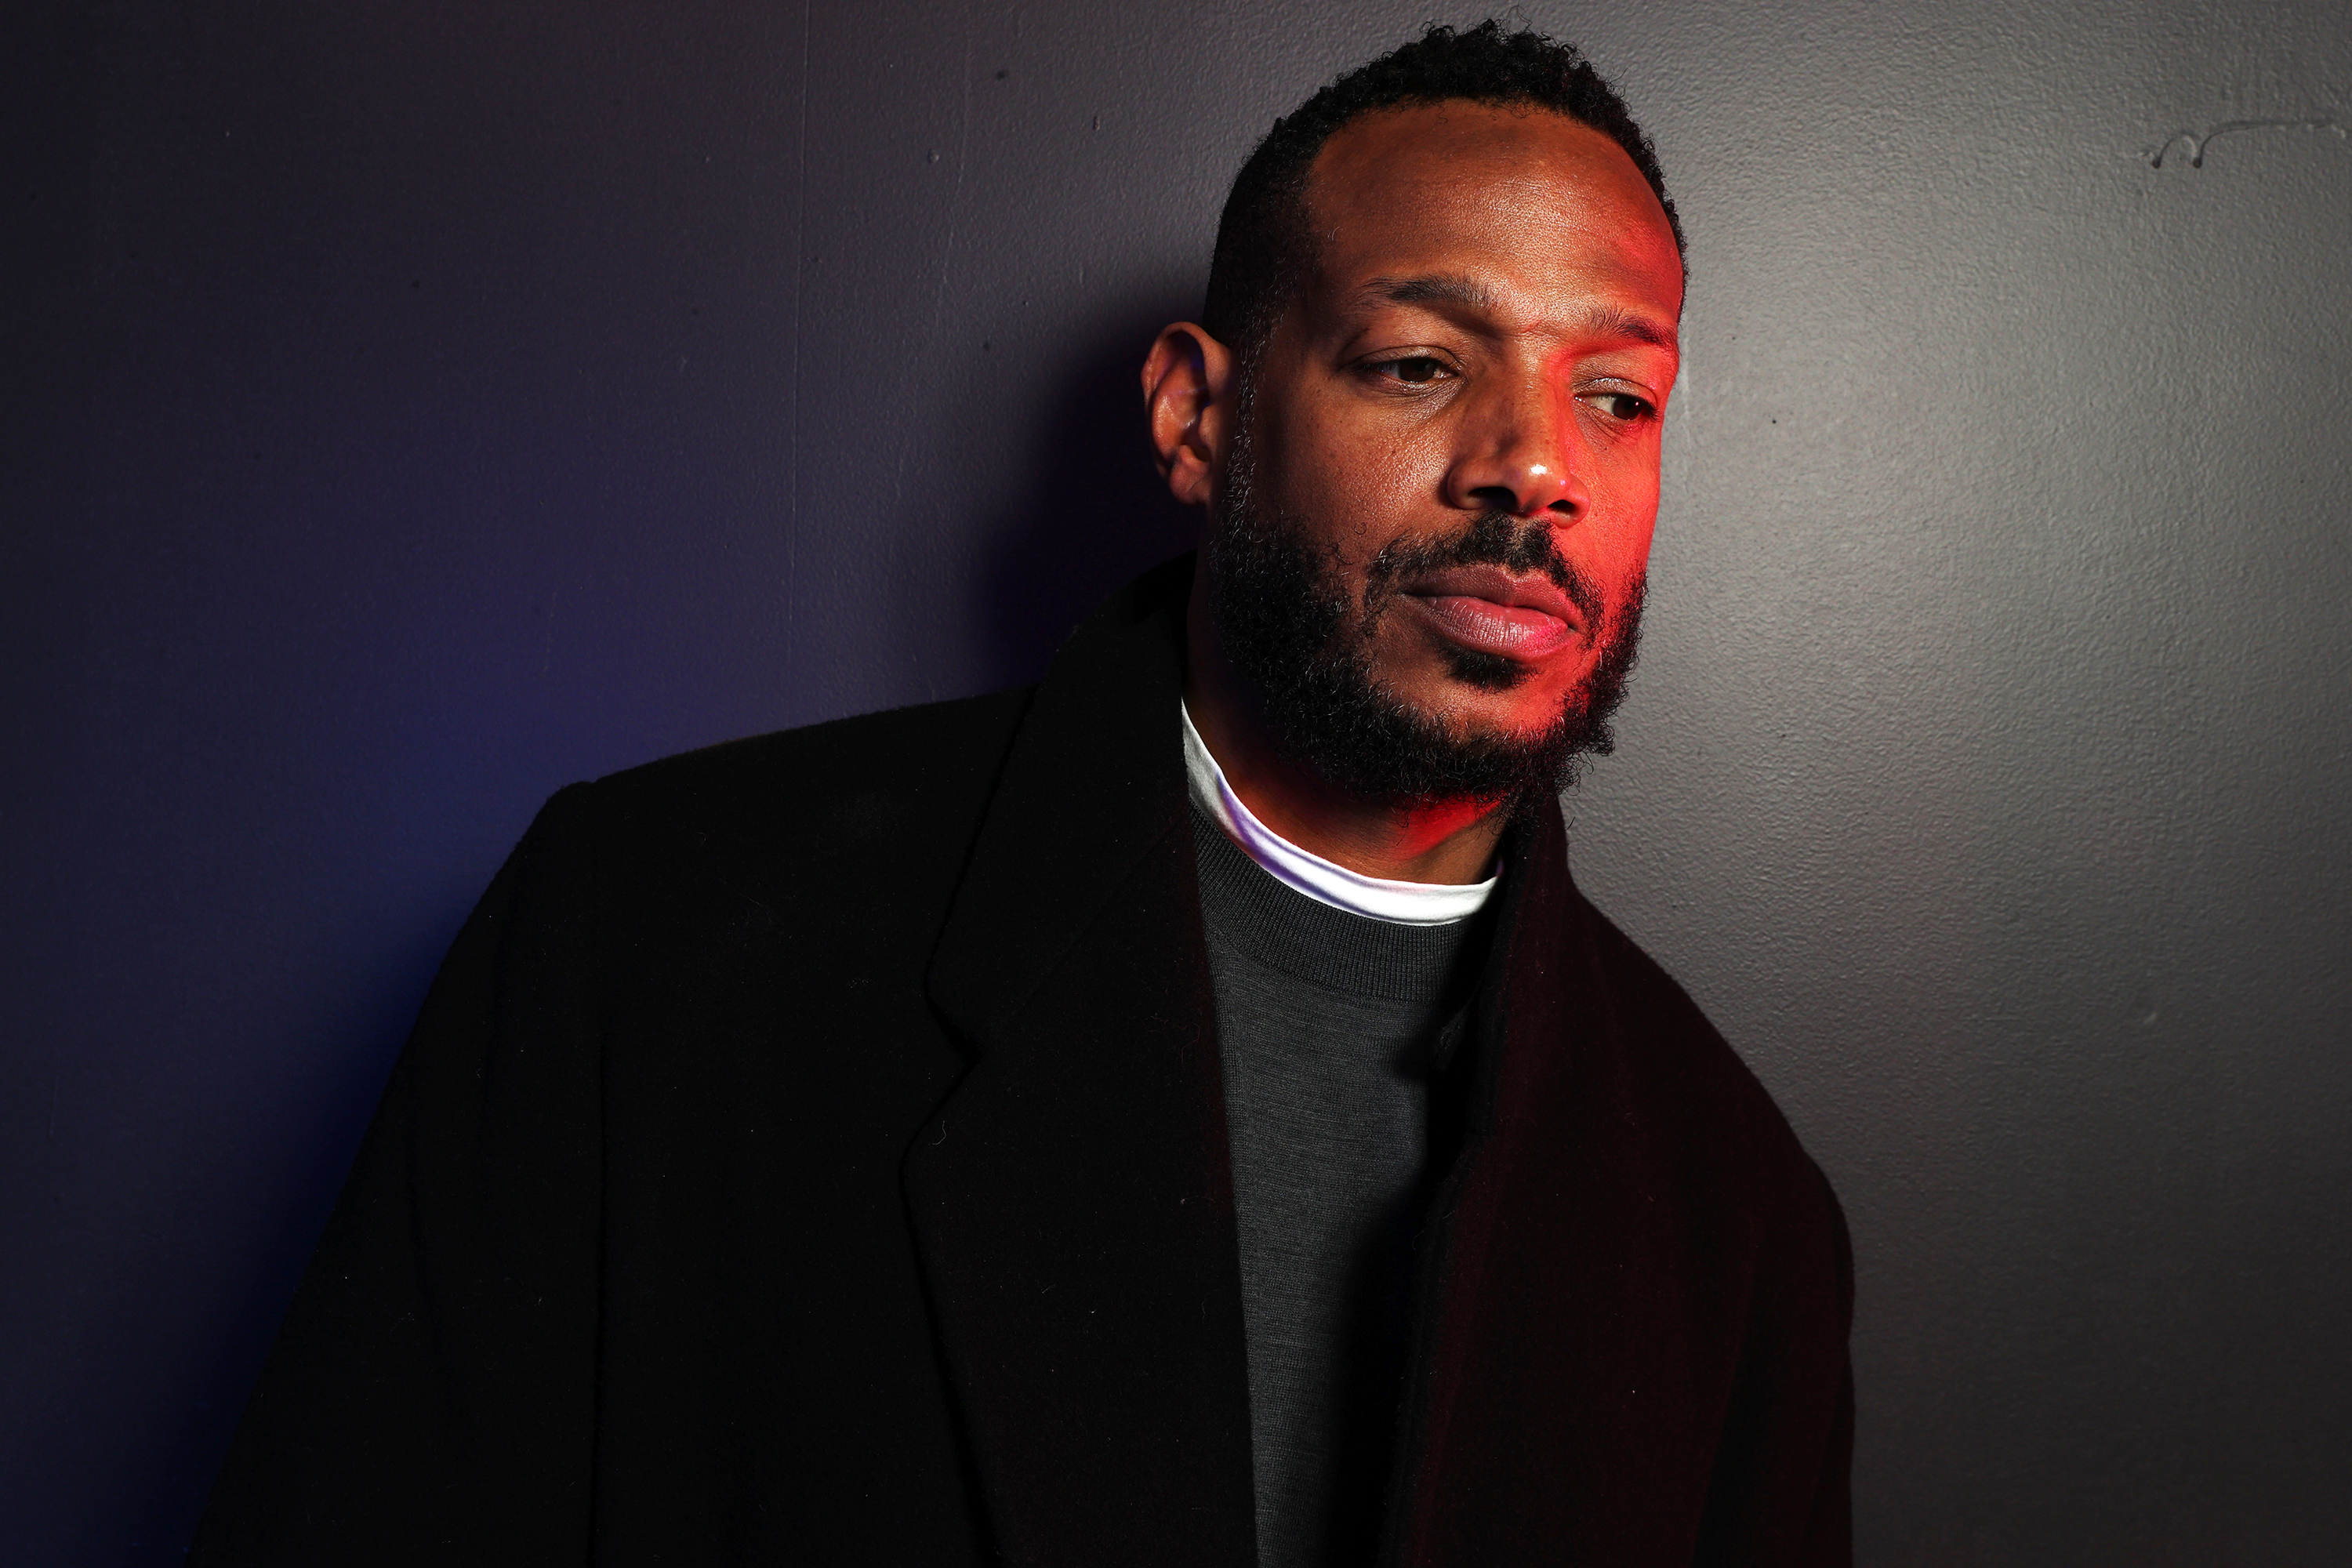 Marlon Wayans posing against a wall, dressed in a dark overcoat with a visible white shirt collar